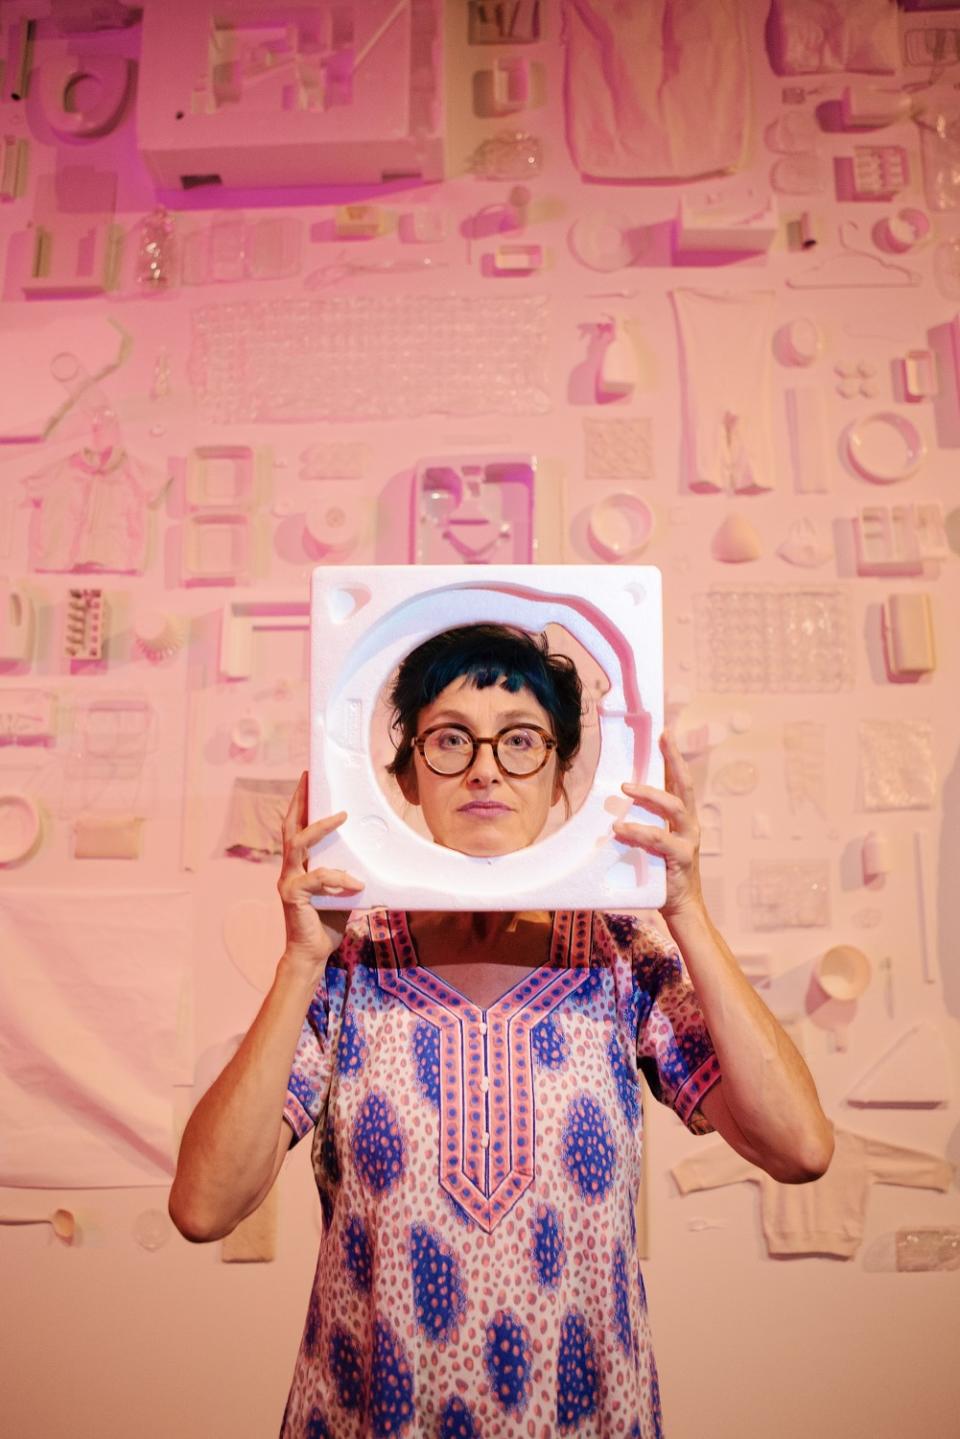 Pipilotti Rist holds a piece of styrofoam as a frame around her head in front of a wall installation